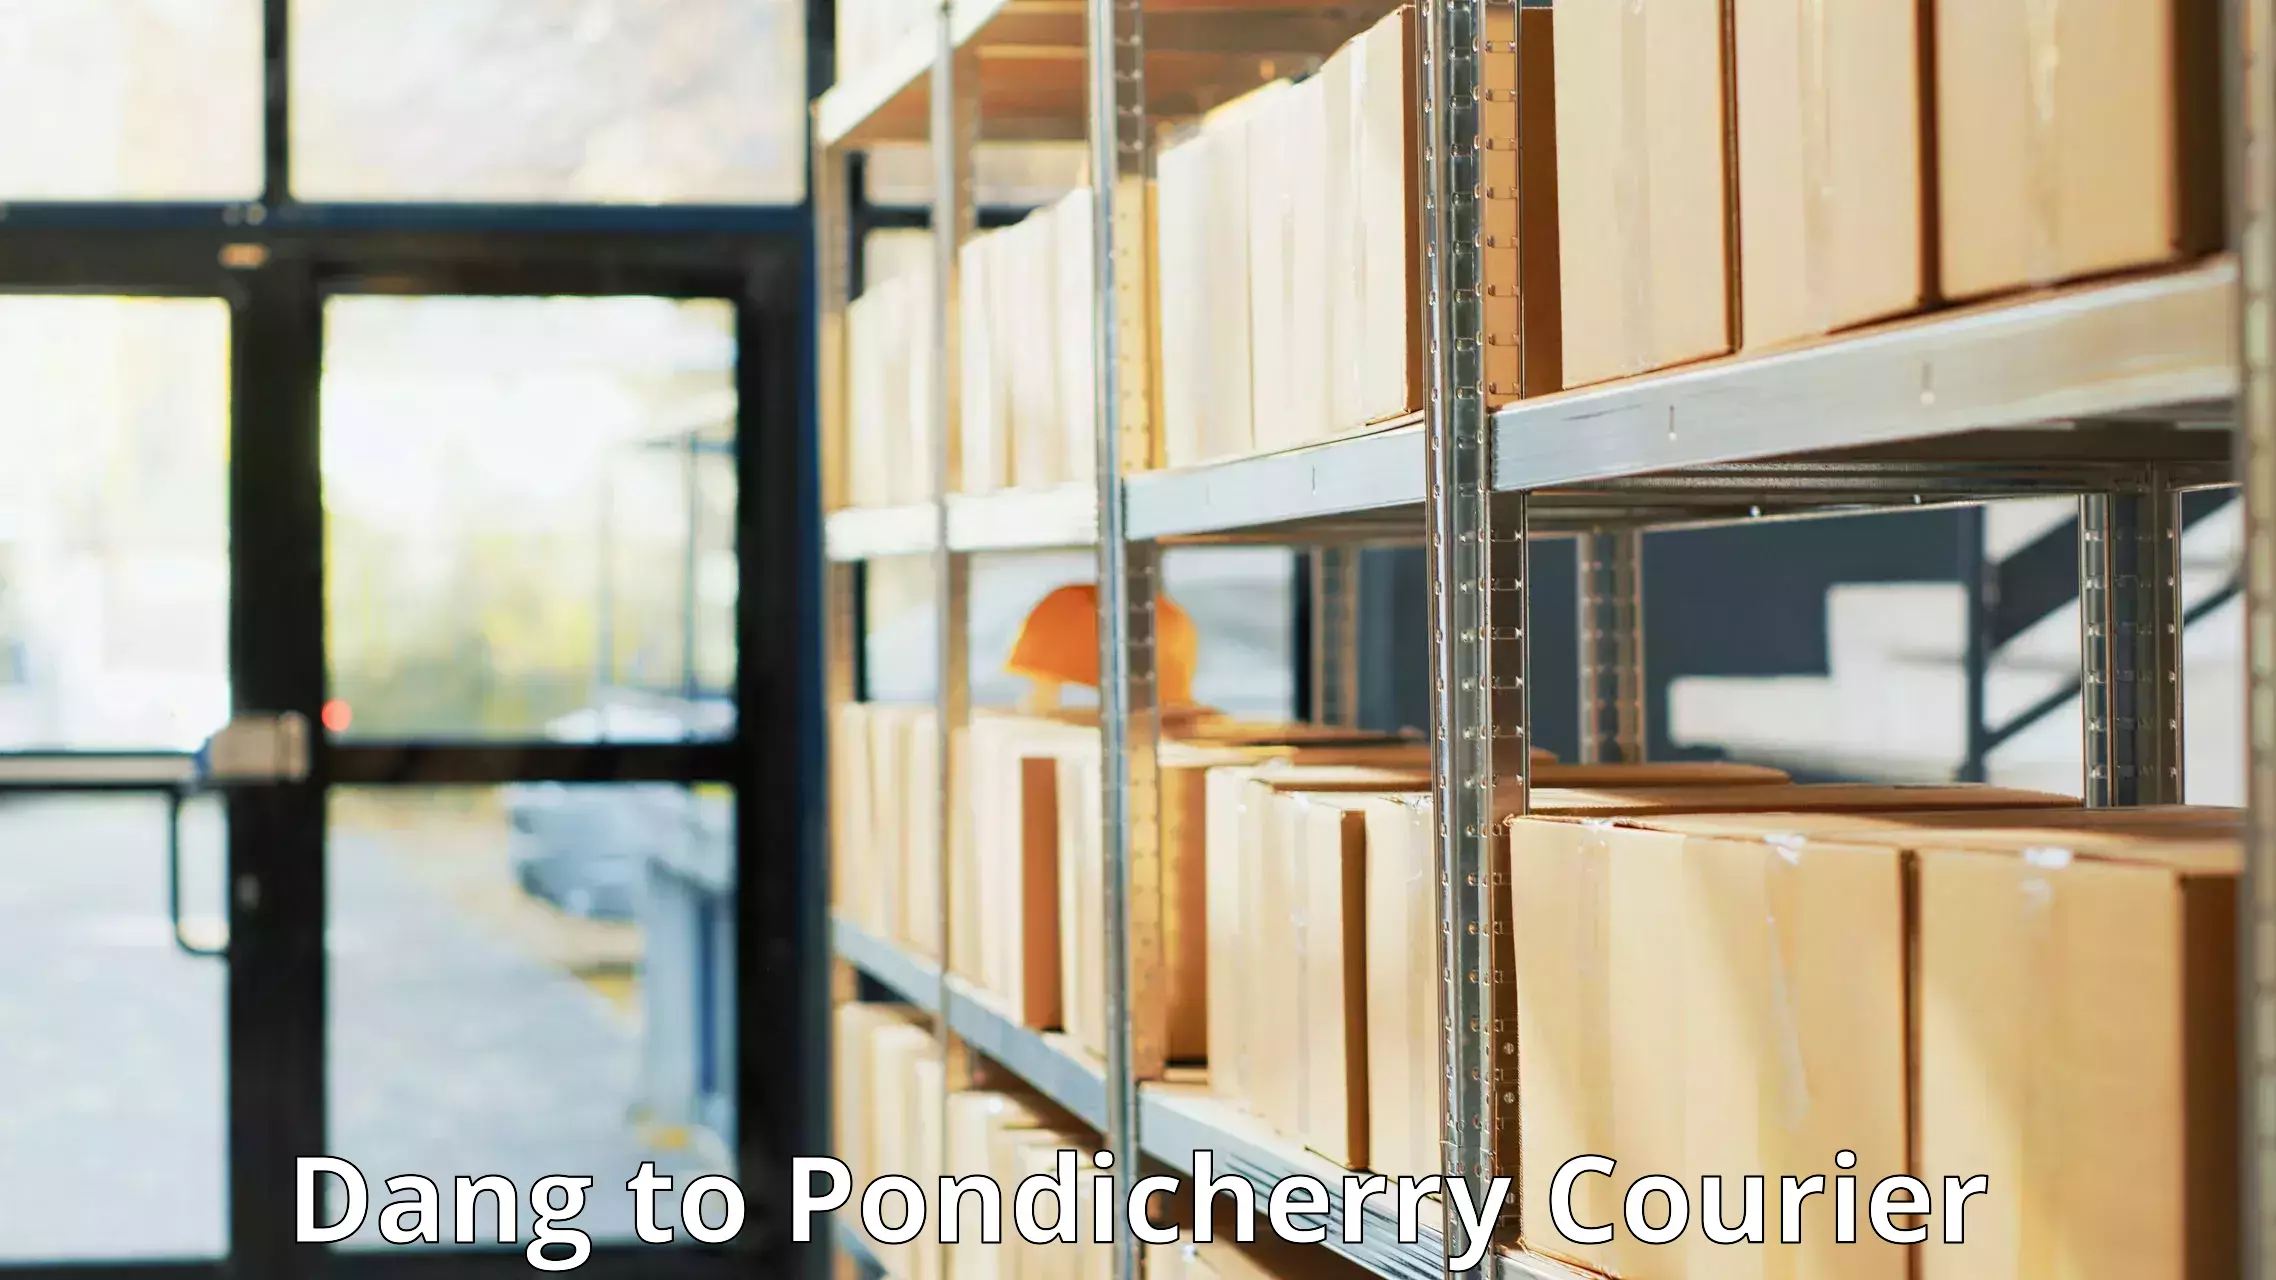 Flexible delivery scheduling Dang to Pondicherry University